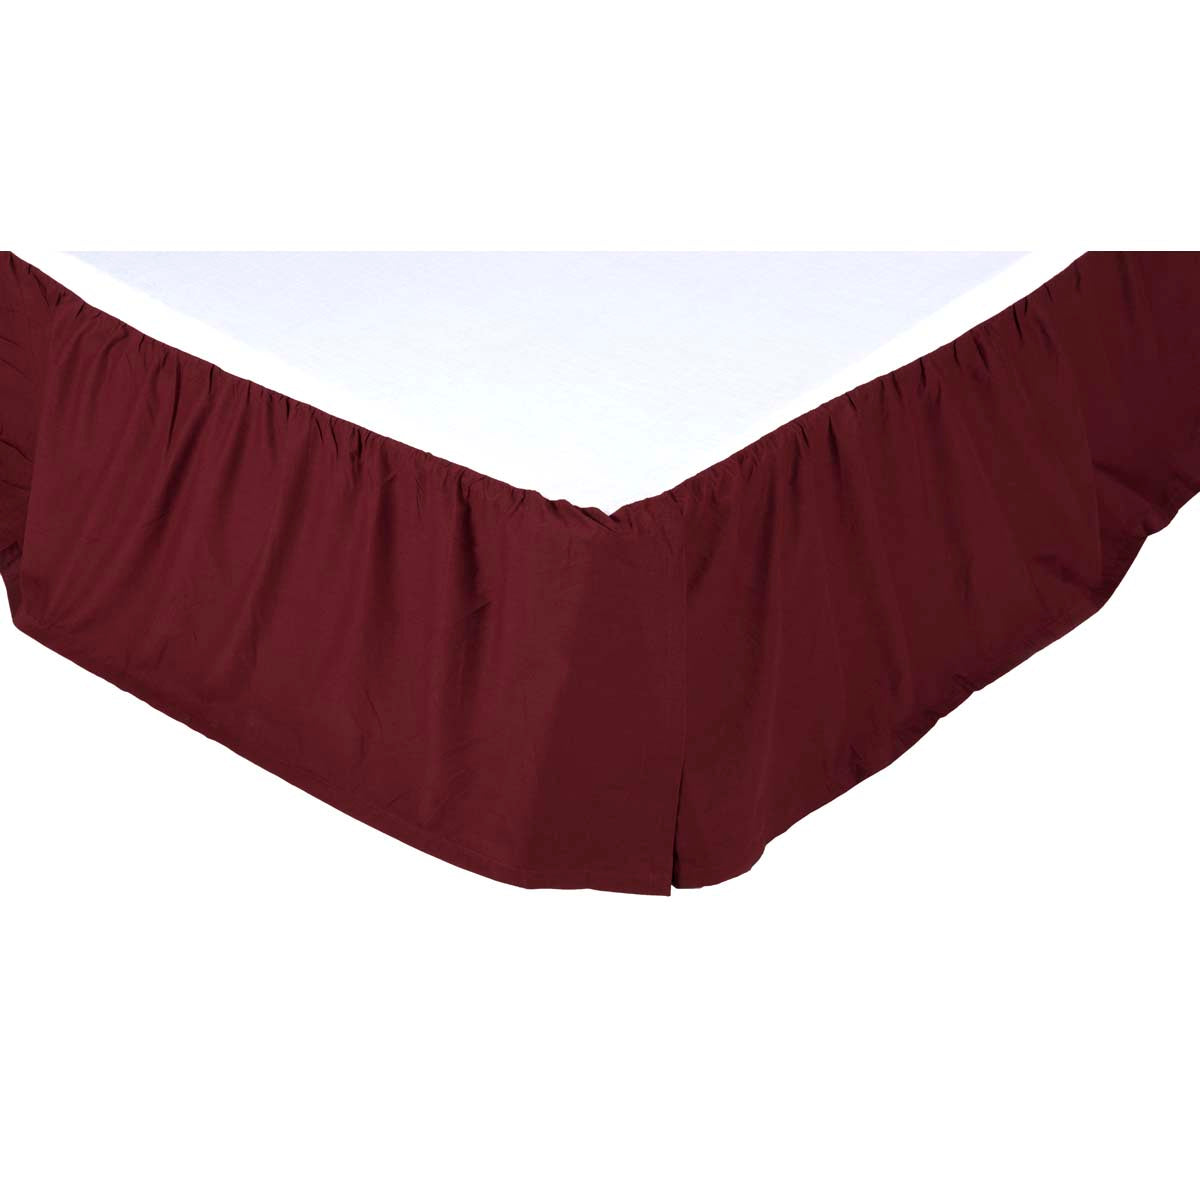 Mayflower Market Solid Burgundy Twin Bed Skirt 39x76x16 By VHC Brands